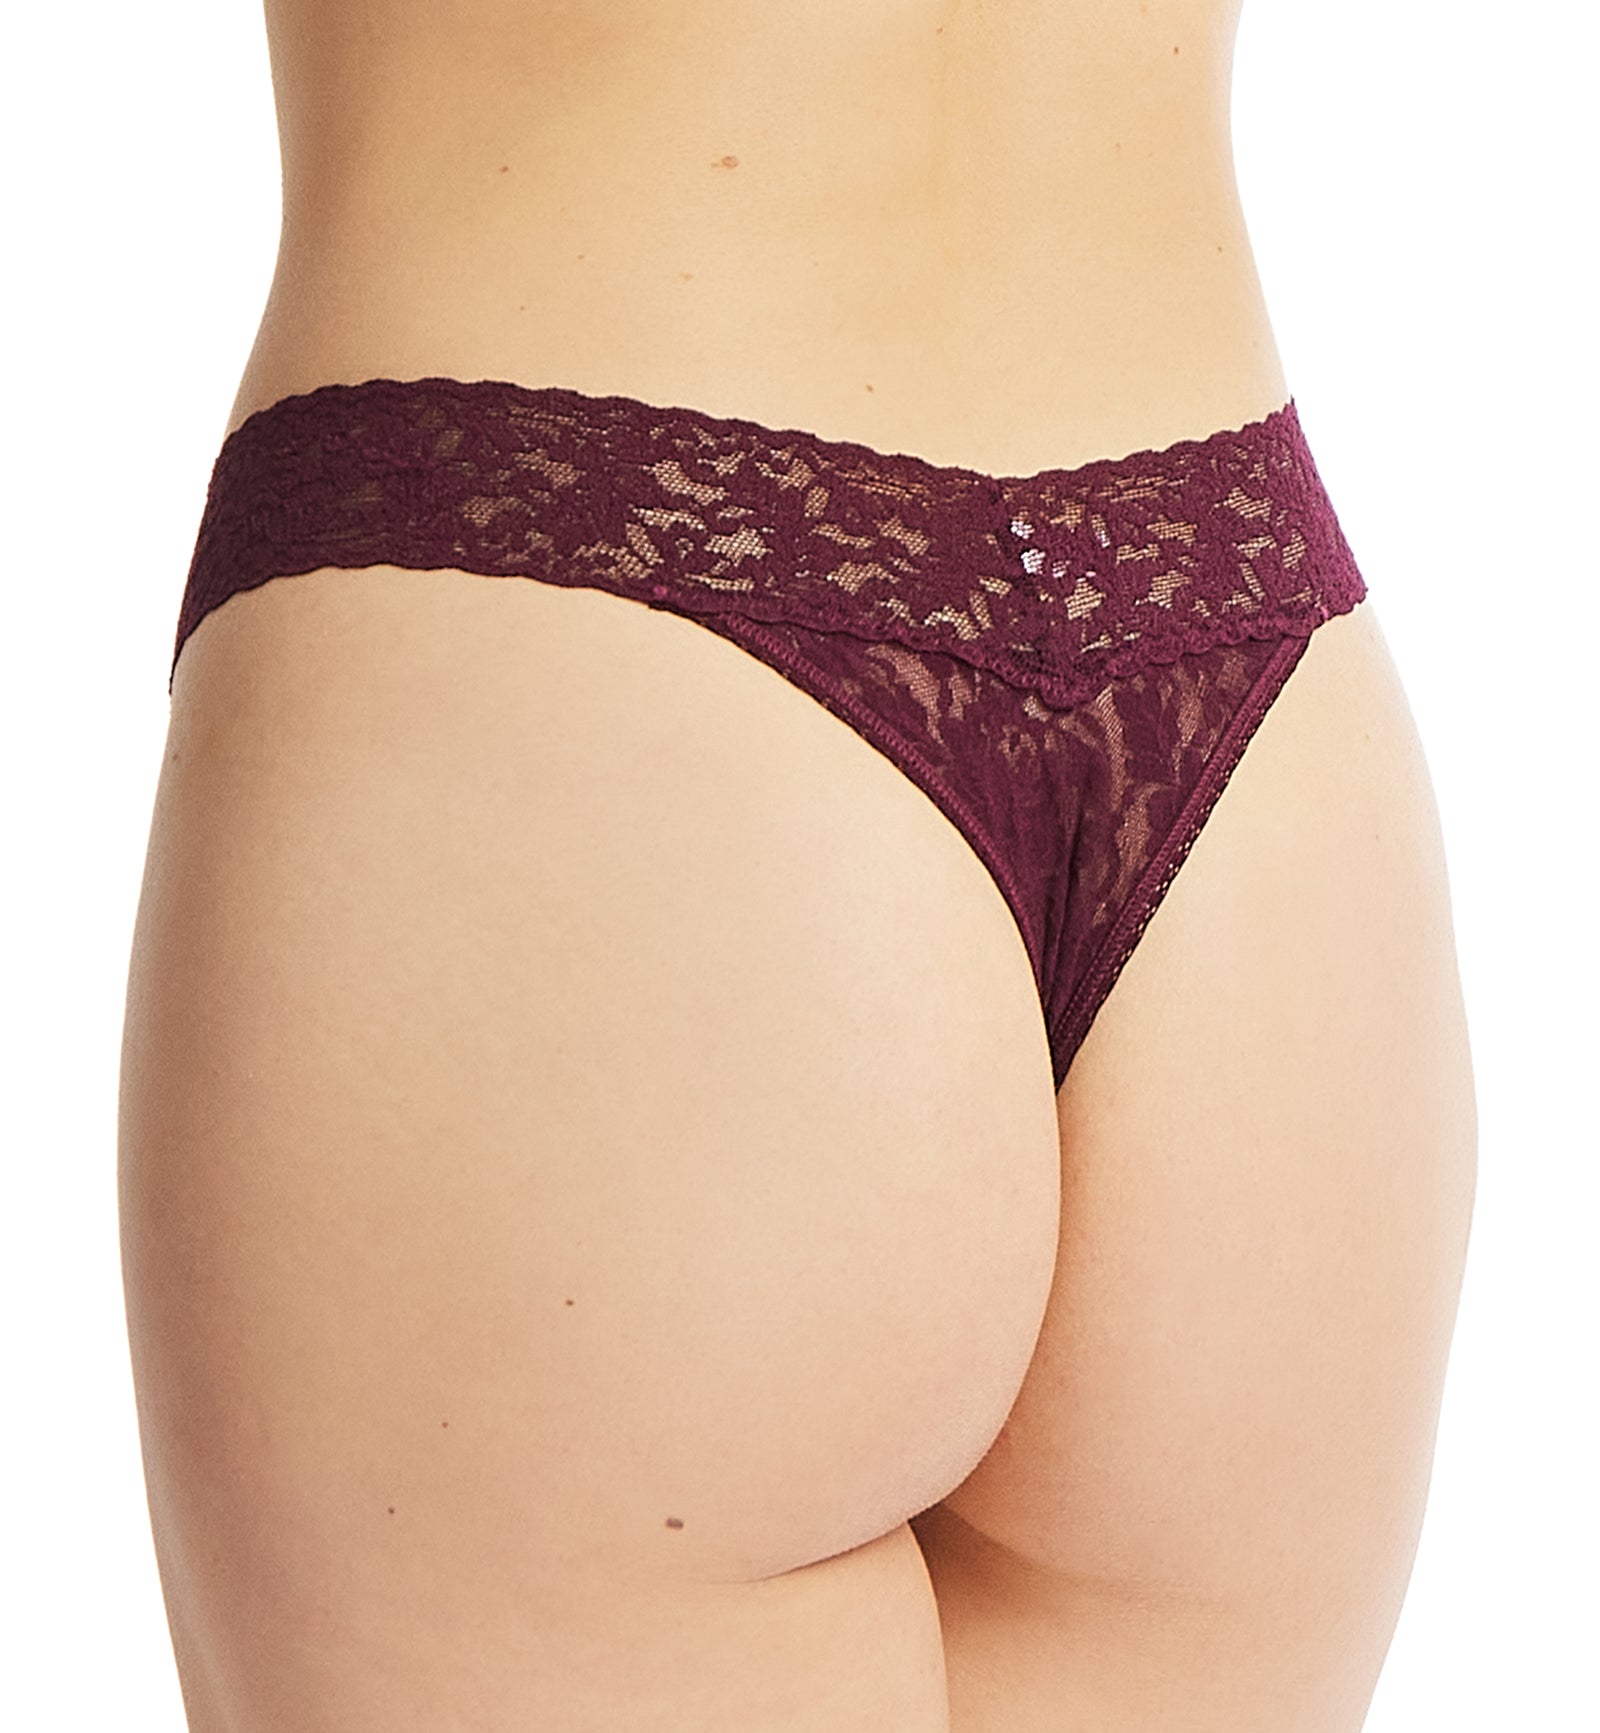 Hanky Panky Signature Lace Original Rise Thong (4811P),Dried Cherry - Dried Cherry,One Size